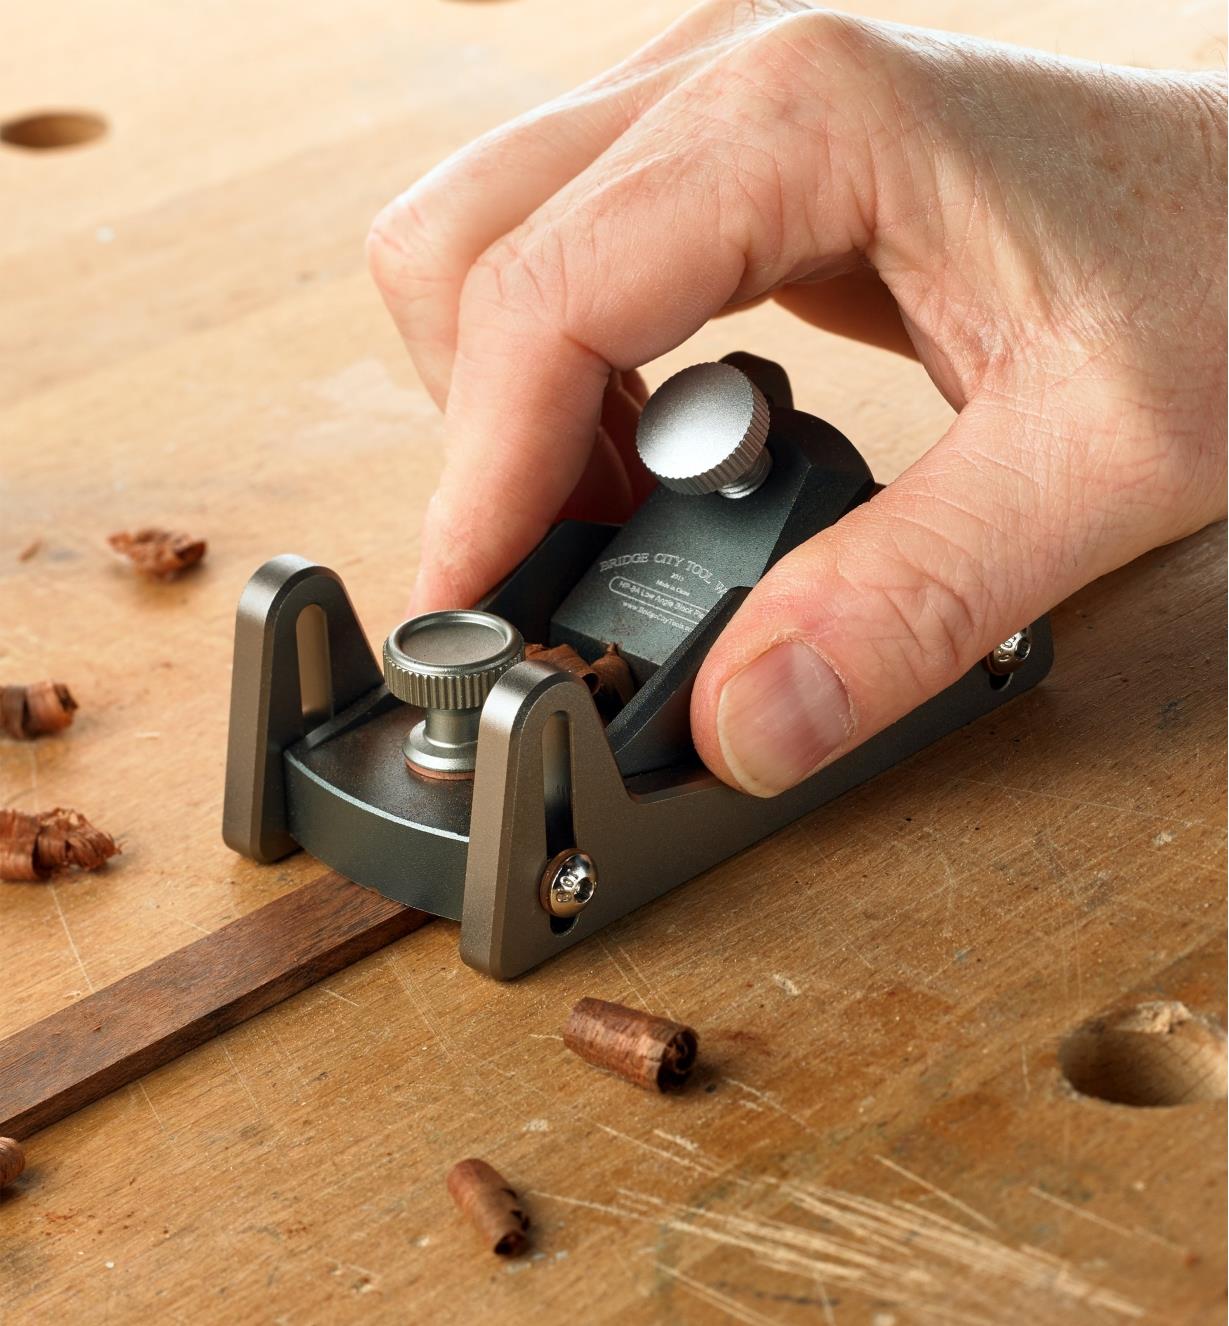 Using the block plane with skates attached to plane a piece of wooden inlay to the correct thickness